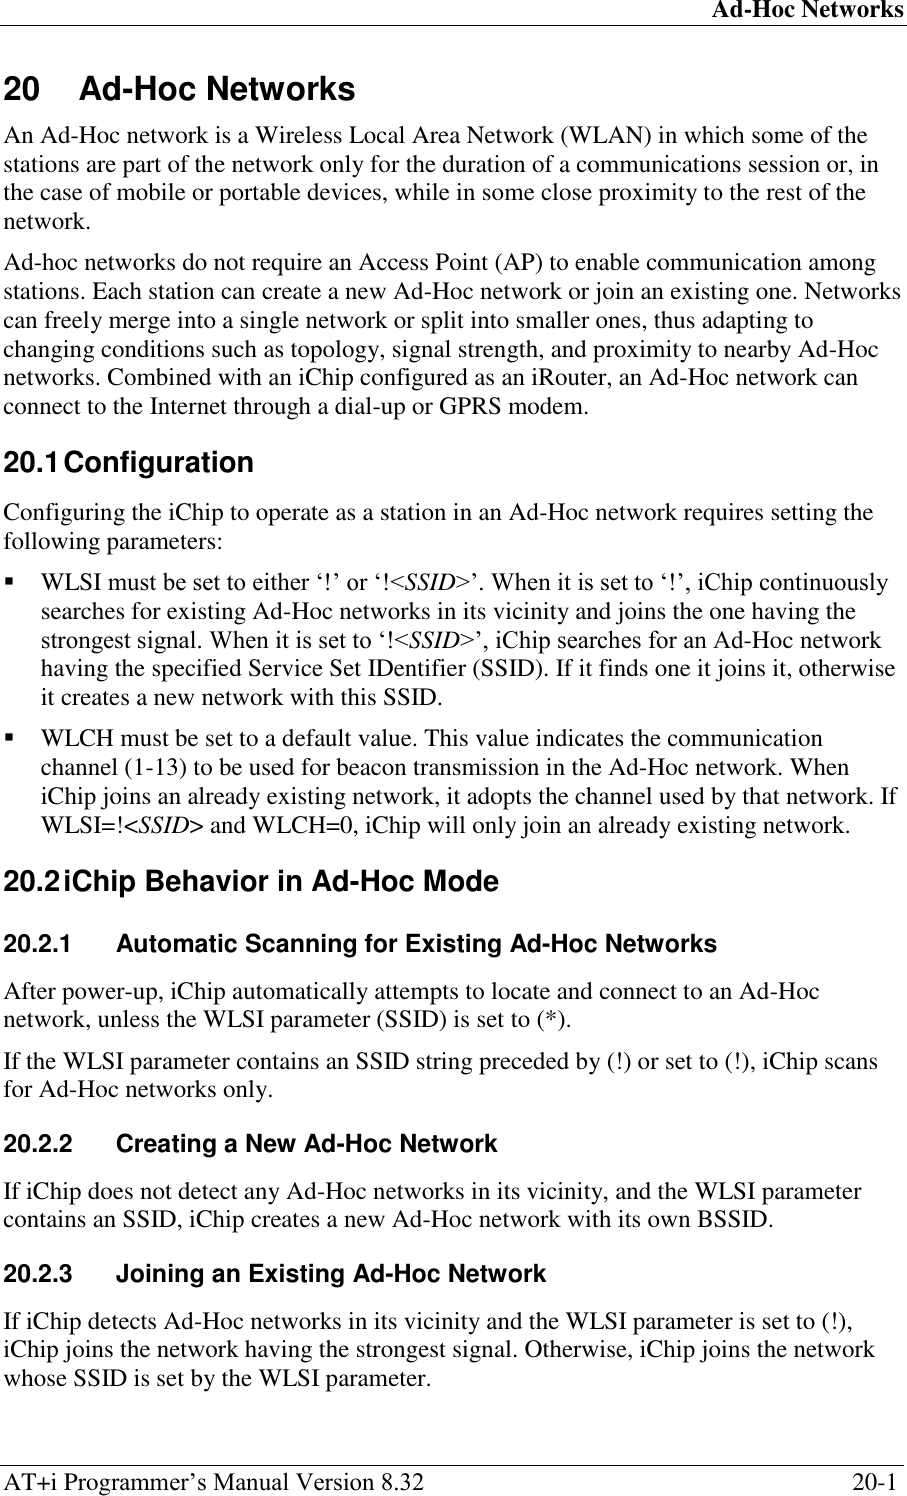 Ad-Hoc Networks AT+i Programmer‘s Manual Version 8.32  20-1 20 Ad-Hoc Networks An Ad-Hoc network is a Wireless Local Area Network (WLAN) in which some of the stations are part of the network only for the duration of a communications session or, in the case of mobile or portable devices, while in some close proximity to the rest of the network. Ad-hoc networks do not require an Access Point (AP) to enable communication among stations. Each station can create a new Ad-Hoc network or join an existing one. Networks can freely merge into a single network or split into smaller ones, thus adapting to changing conditions such as topology, signal strength, and proximity to nearby Ad-Hoc networks. Combined with an iChip configured as an iRouter, an Ad-Hoc network can connect to the Internet through a dial-up or GPRS modem. 20.1 Configuration Configuring the iChip to operate as a station in an Ad-Hoc network requires setting the following parameters:  WLSI must be set to either ‗!‘ or ‗!&lt;SSID&gt;‘. When it is set to ‗!‘, iChip continuously searches for existing Ad-Hoc networks in its vicinity and joins the one having the strongest signal. When it is set to ‗!&lt;SSID&gt;‘, iChip searches for an Ad-Hoc network having the specified Service Set IDentifier (SSID). If it finds one it joins it, otherwise it creates a new network with this SSID.   WLCH must be set to a default value. This value indicates the communication channel (1-13) to be used for beacon transmission in the Ad-Hoc network. When iChip joins an already existing network, it adopts the channel used by that network. If WLSI=!&lt;SSID&gt; and WLCH=0, iChip will only join an already existing network. 20.2 iChip Behavior in Ad-Hoc Mode 20.2.1  Automatic Scanning for Existing Ad-Hoc Networks After power-up, iChip automatically attempts to locate and connect to an Ad-Hoc network, unless the WLSI parameter (SSID) is set to (*). If the WLSI parameter contains an SSID string preceded by (!) or set to (!), iChip scans for Ad-Hoc networks only. 20.2.2  Creating a New Ad-Hoc Network If iChip does not detect any Ad-Hoc networks in its vicinity, and the WLSI parameter contains an SSID, iChip creates a new Ad-Hoc network with its own BSSID. 20.2.3  Joining an Existing Ad-Hoc Network If iChip detects Ad-Hoc networks in its vicinity and the WLSI parameter is set to (!), iChip joins the network having the strongest signal. Otherwise, iChip joins the network whose SSID is set by the WLSI parameter. 